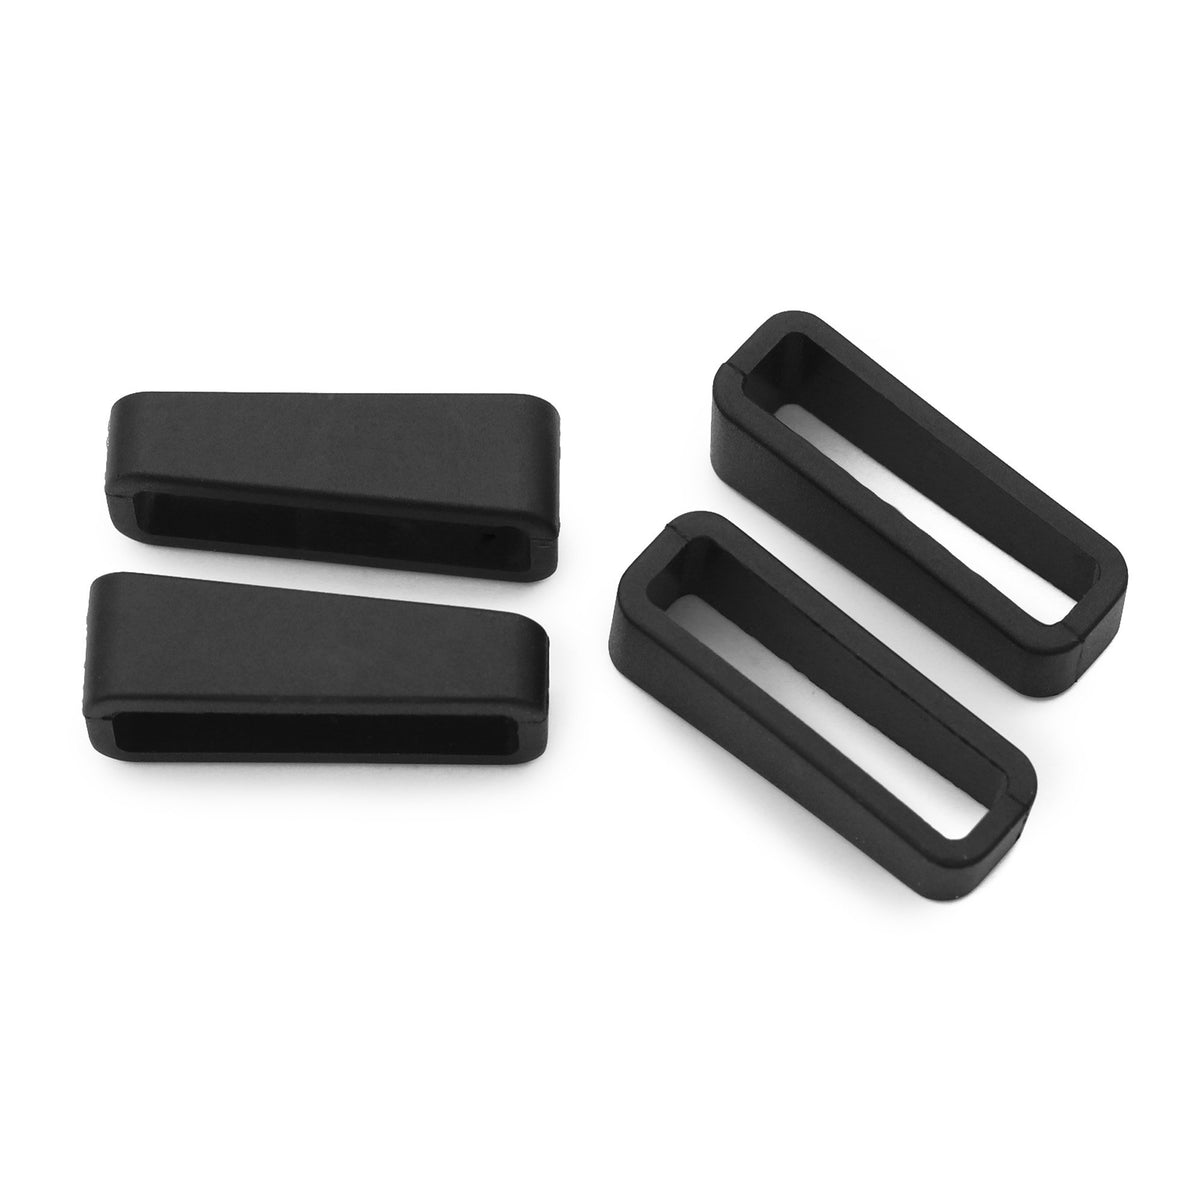 Rubber Watch Band Strap Keeper for 20mm, 22mm or 24mm watch bands, pack of 4 pcs, Black Strapcode Watch Parts